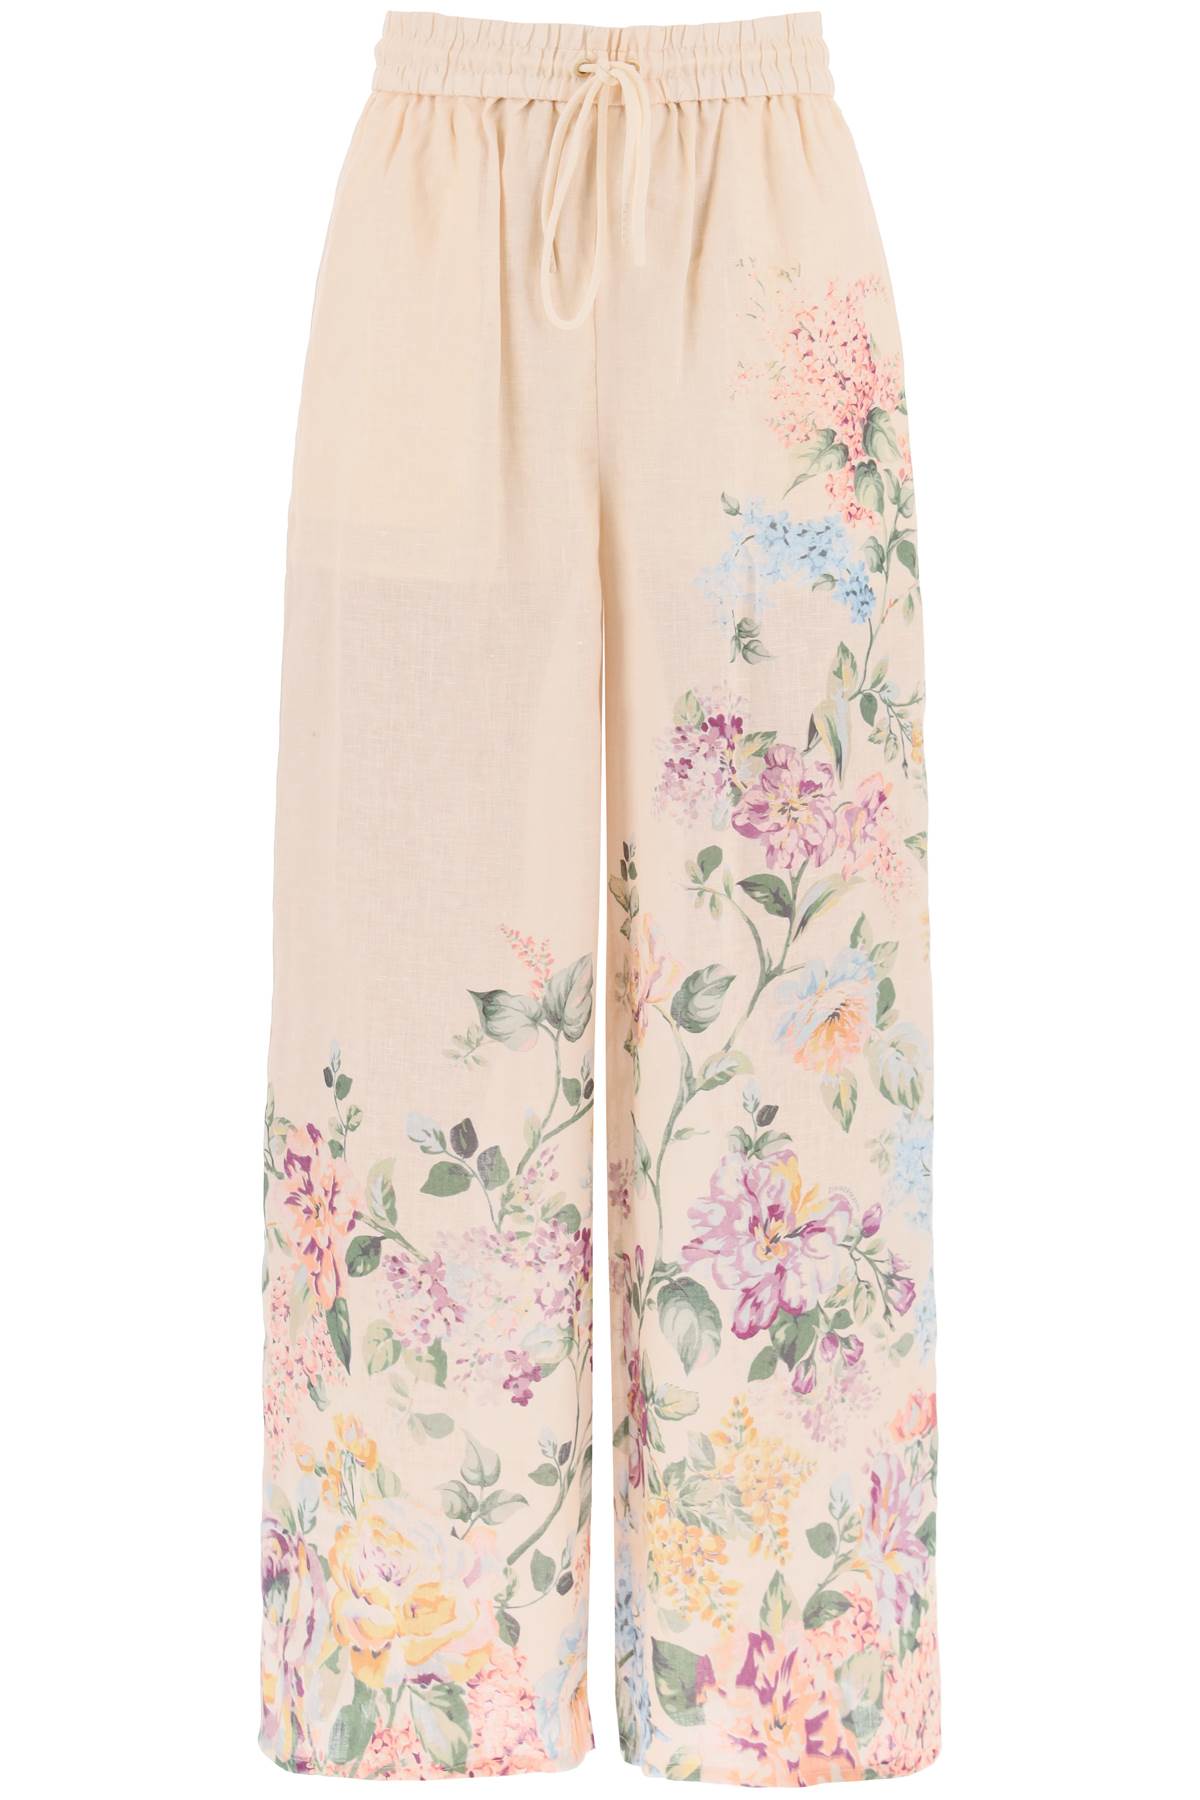 Shop Zimmermann Linen Pants By Halliday In Pink